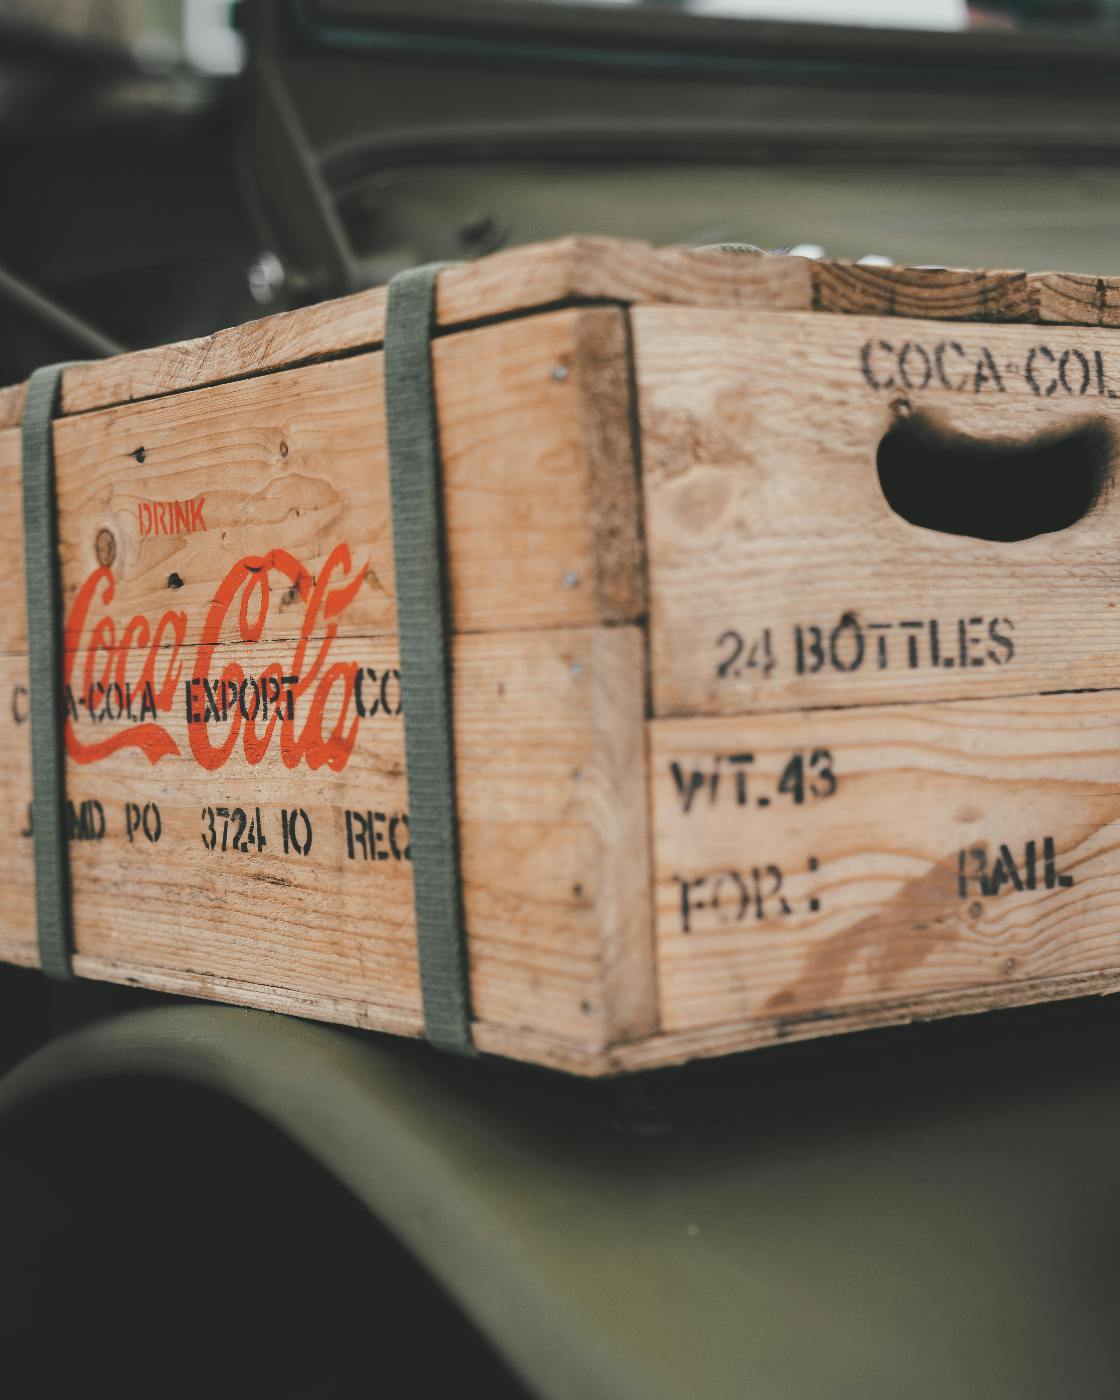 An antique wood case of Coca-Cola, strapped to the fender of an old car